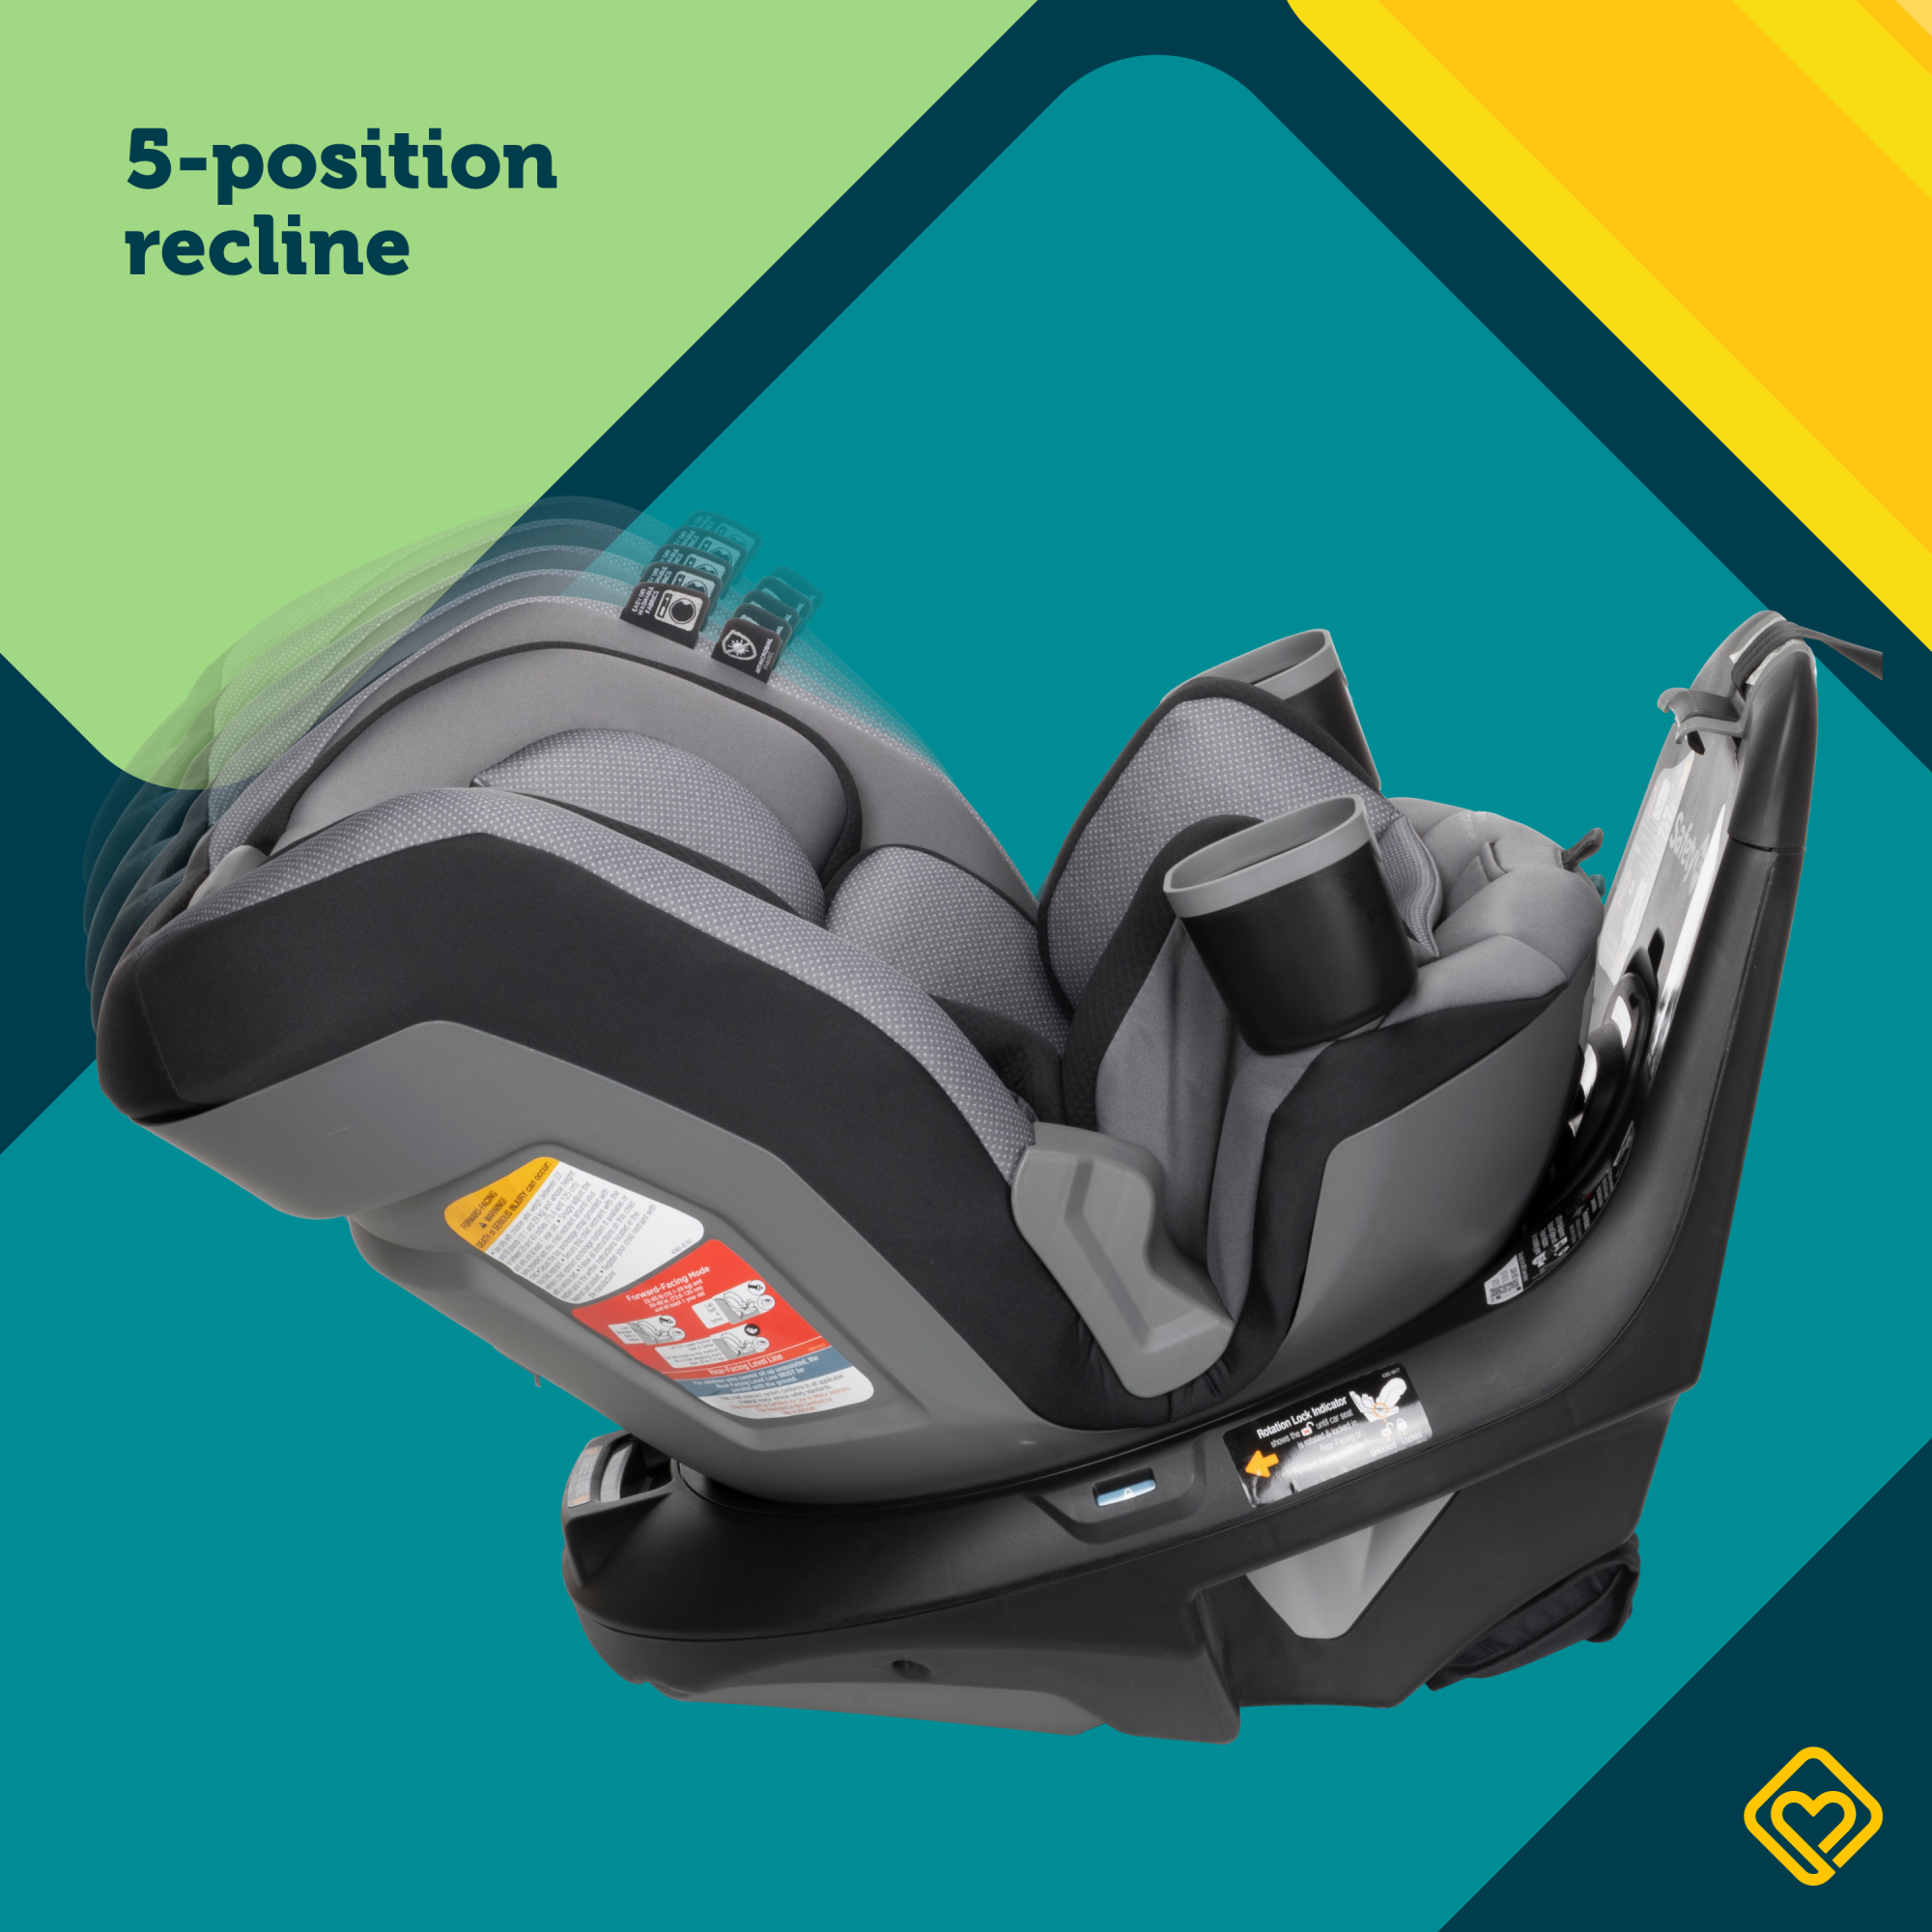 Turn and Go 360 DLX Rotating All-in-One Convertible Car Seat - 5-position recline